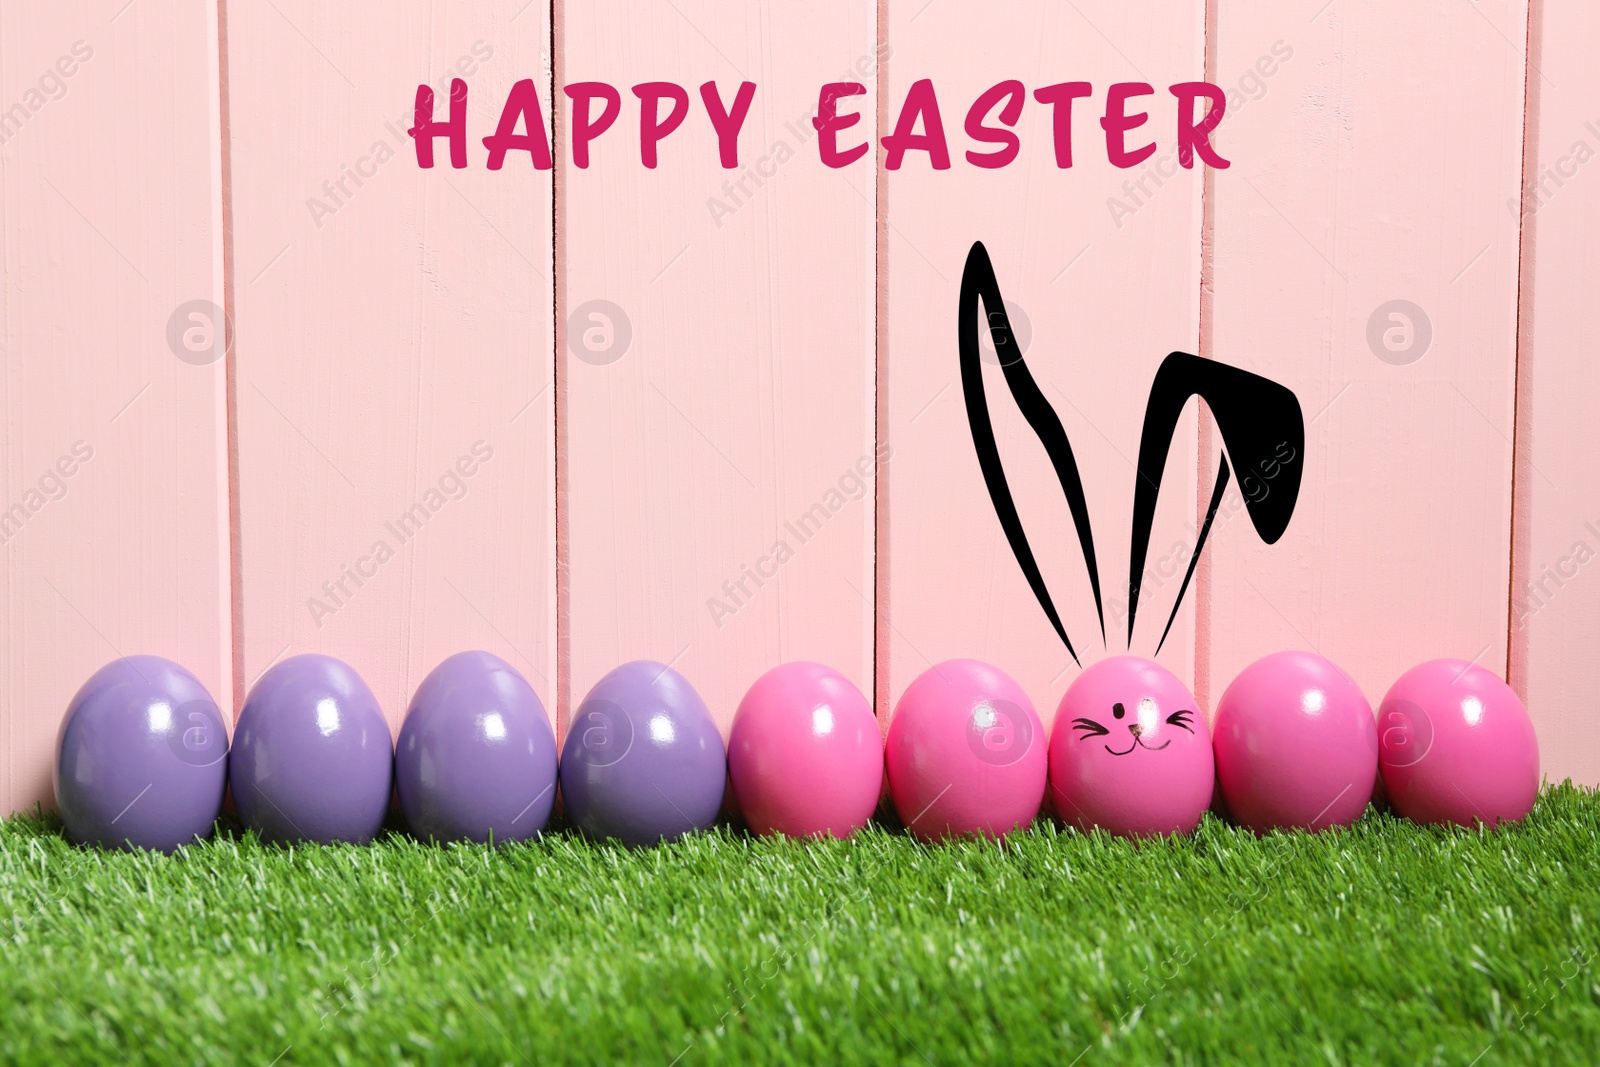 Image of One egg with drawn face and ears as Easter bunny among others on green grass against pink wooden background